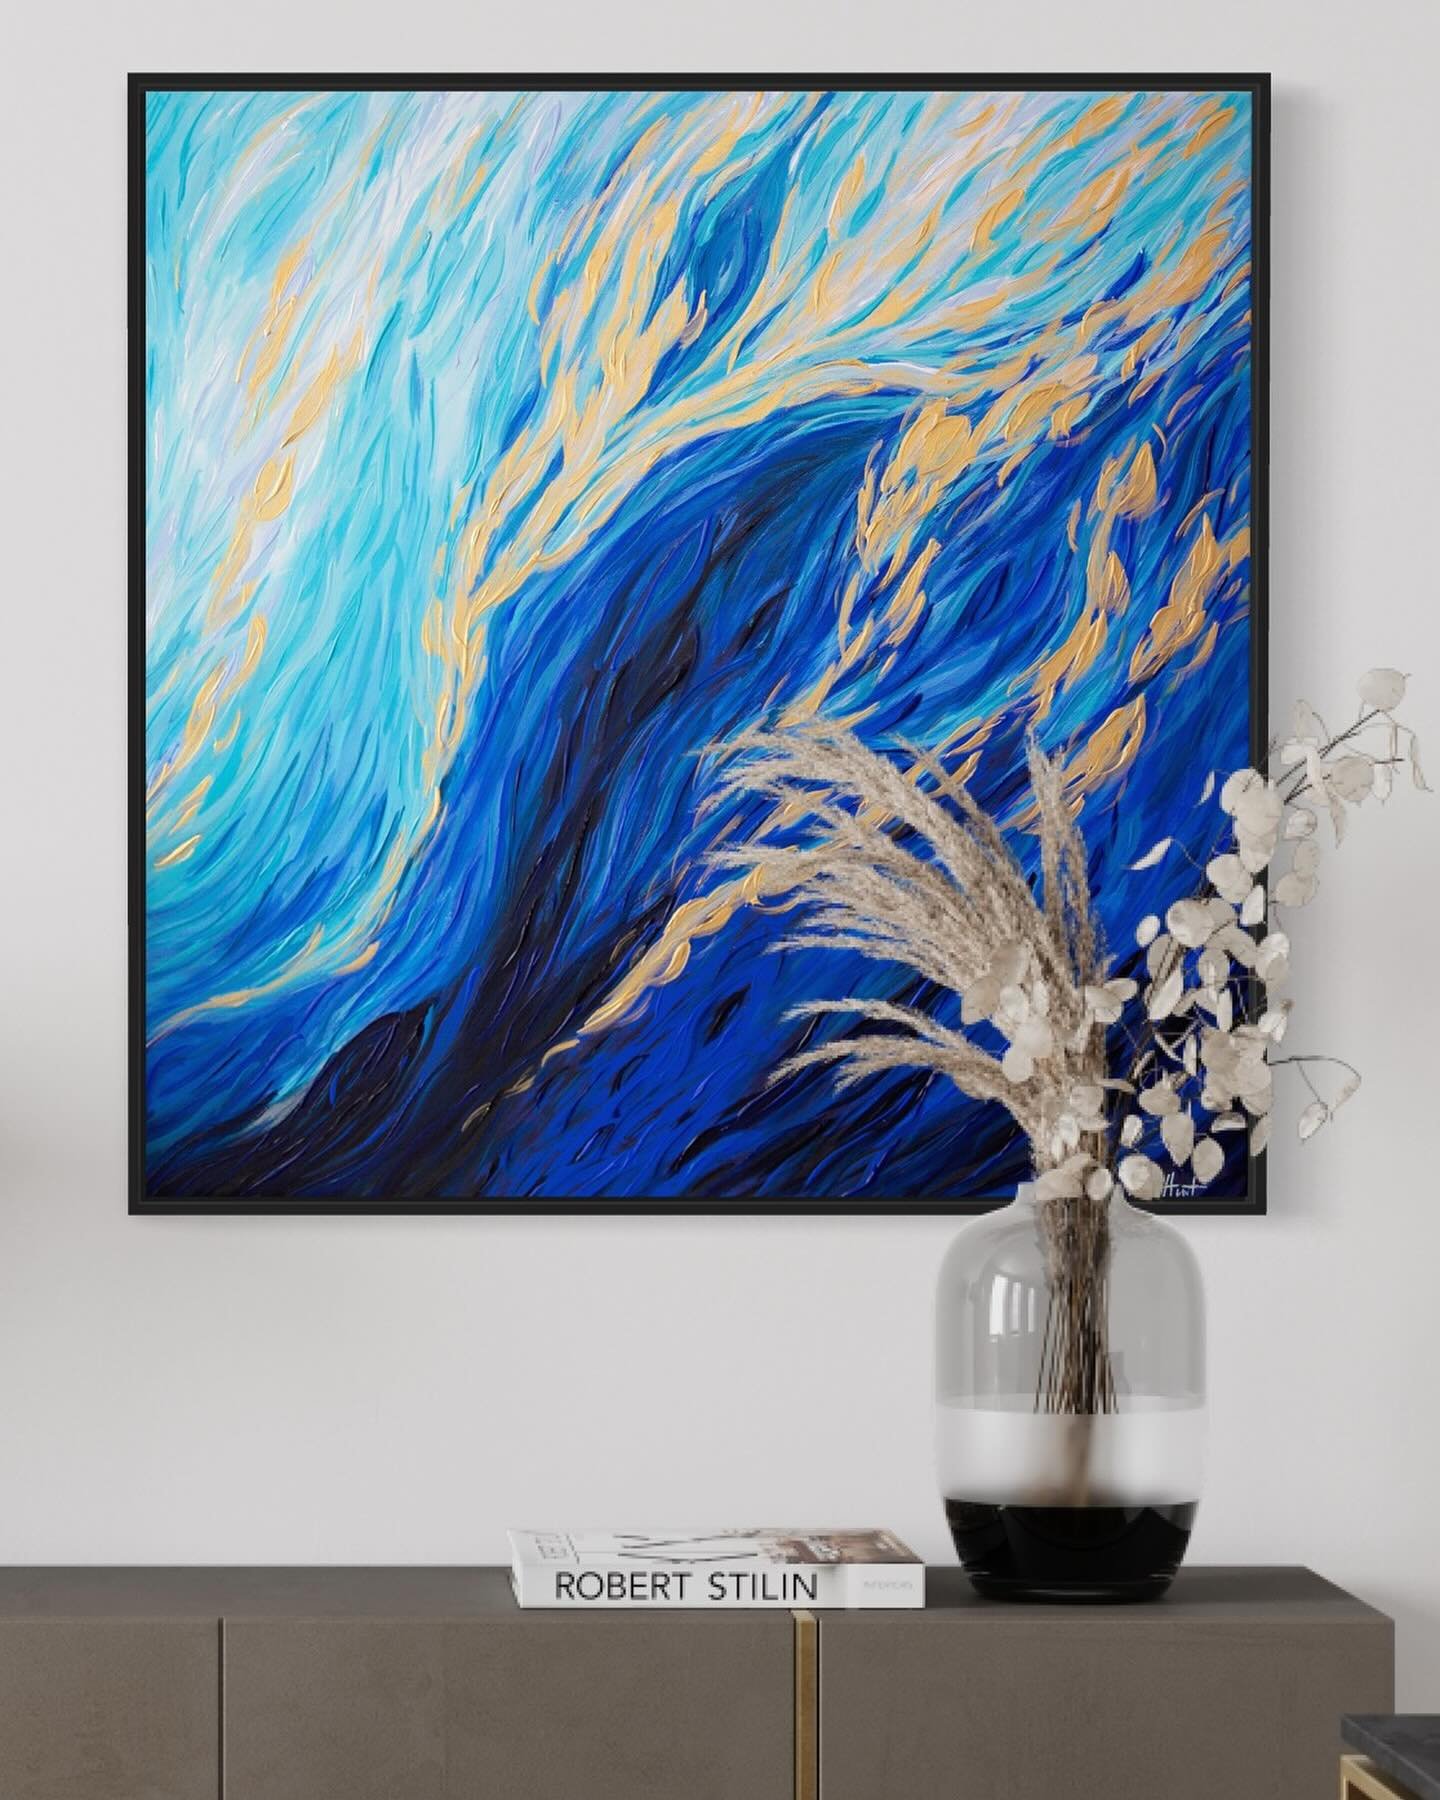 GOLD or SILVER?

I recently embellished the &lsquo;Radiance&rsquo; print in both silver and gold (along with varying blue hues throughout the rest of the painting).

SWIPE 👉🏻 to see both paintings side by side and let me know which you prefer?

I w